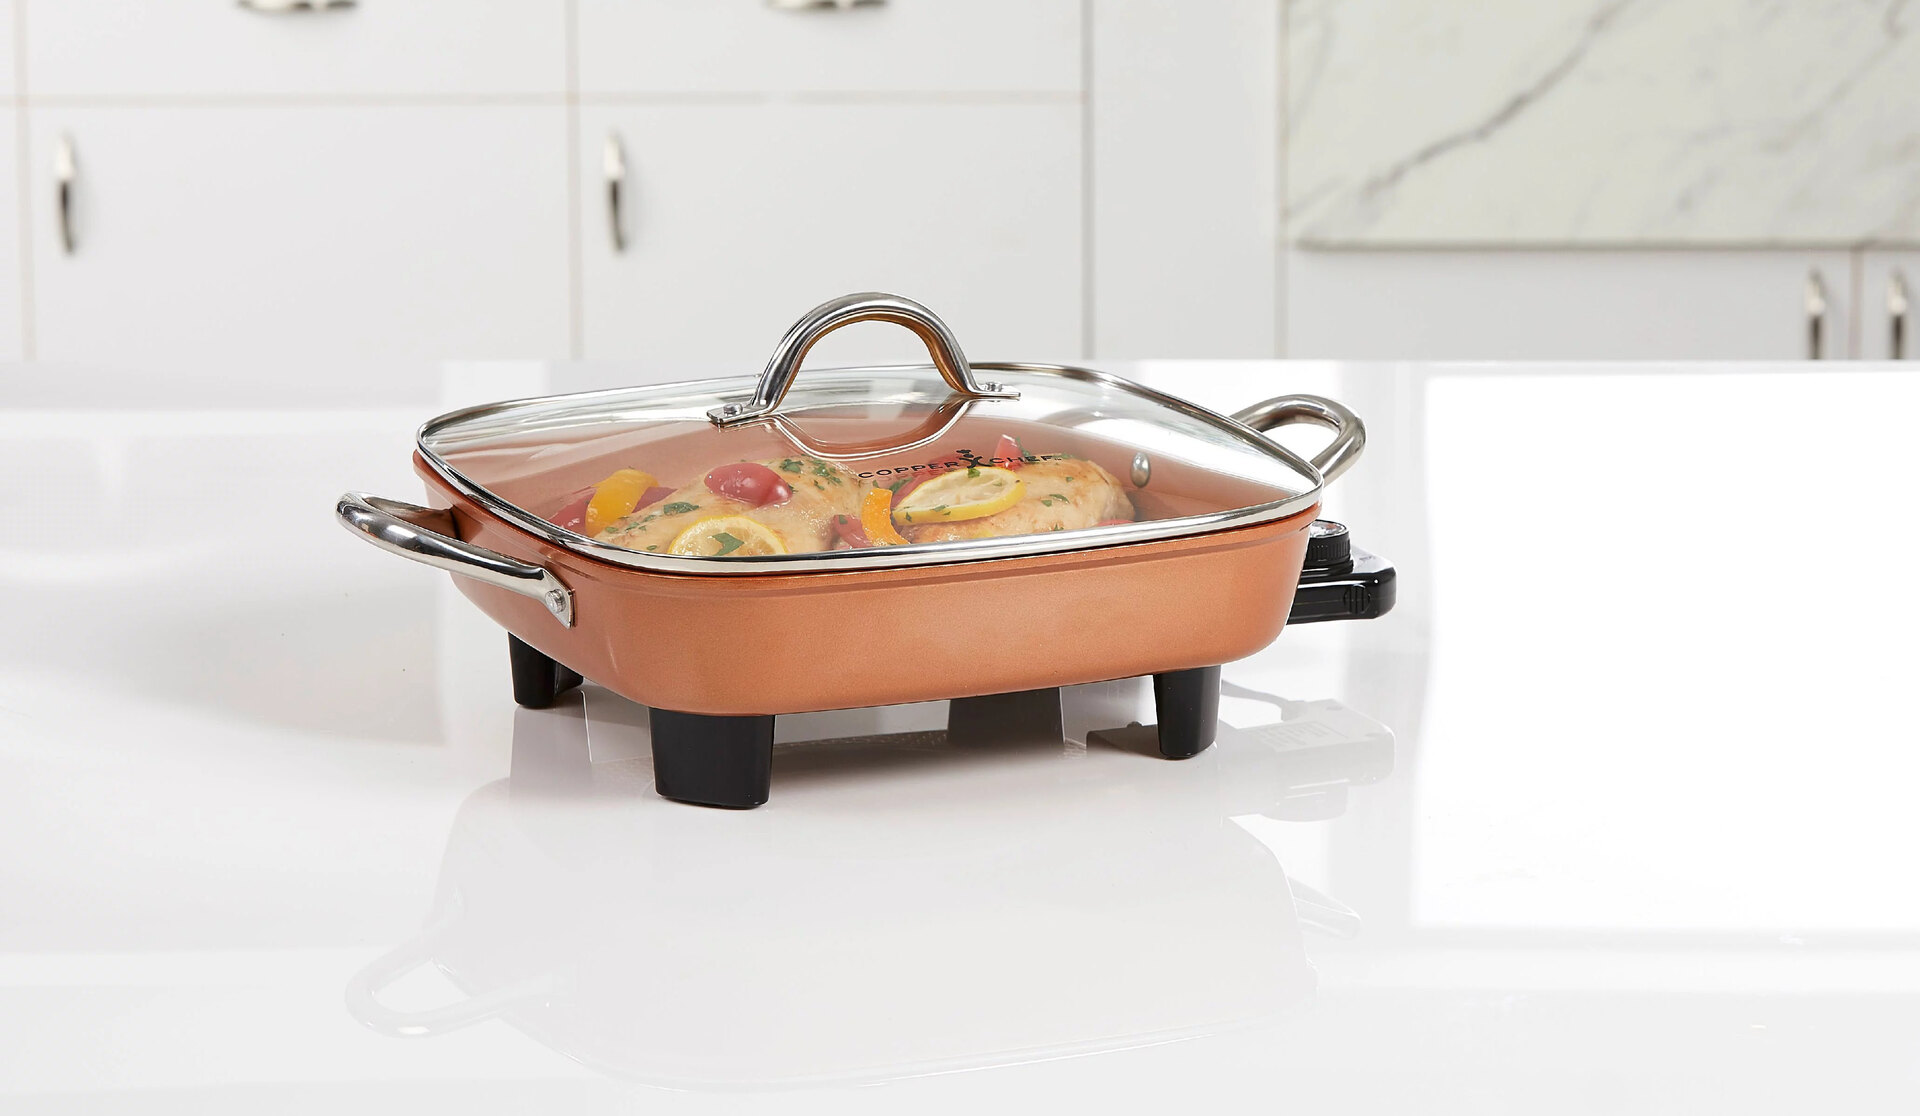 Copper Chef 11-in. Casserole Pan As Seen on TV